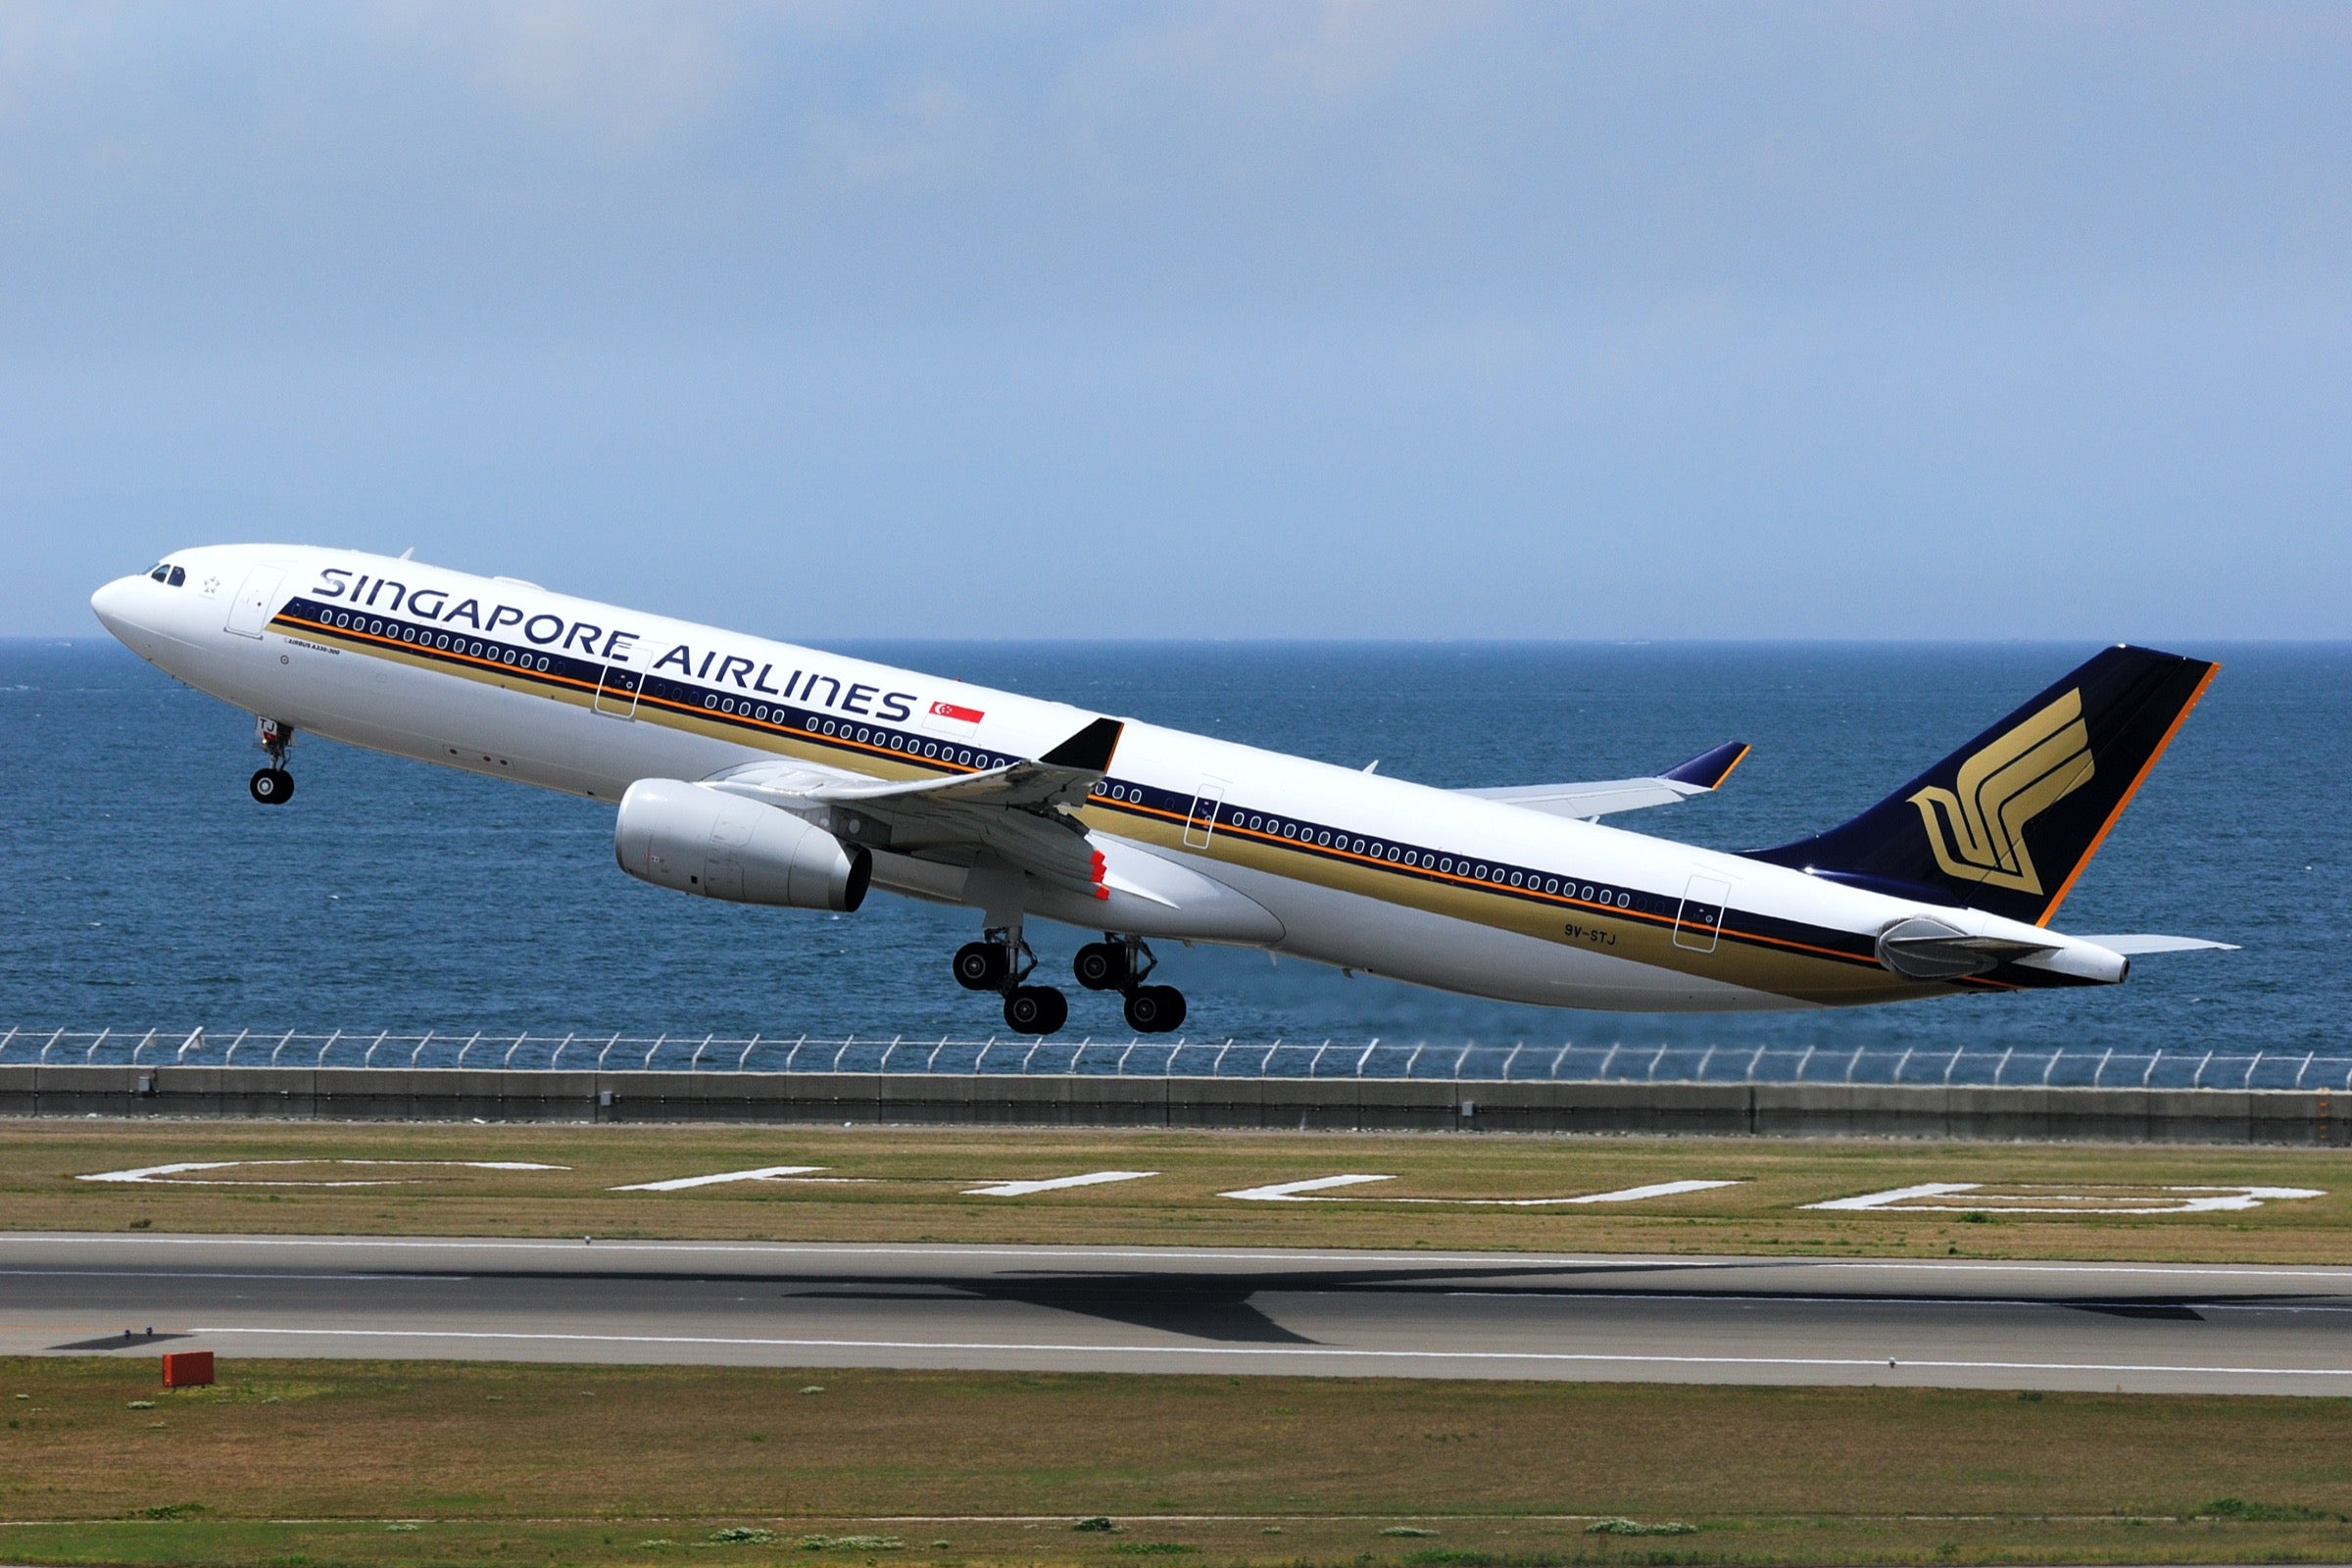 Singapore Airlines A330-300